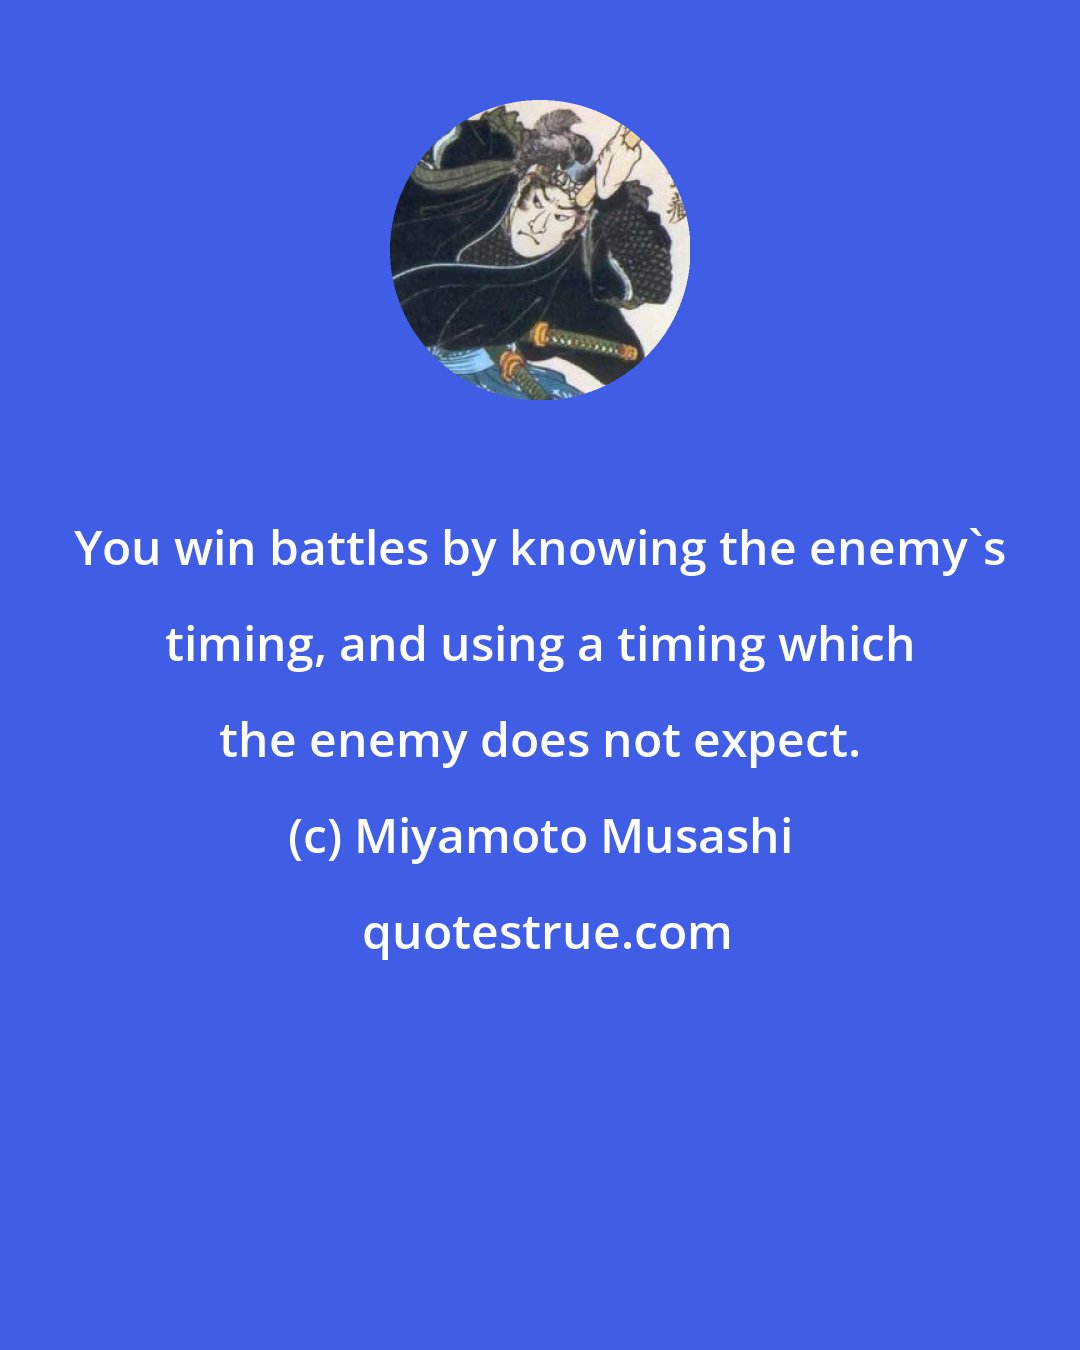 Miyamoto Musashi: You win battles by knowing the enemy's timing, and using a timing which the enemy does not expect.